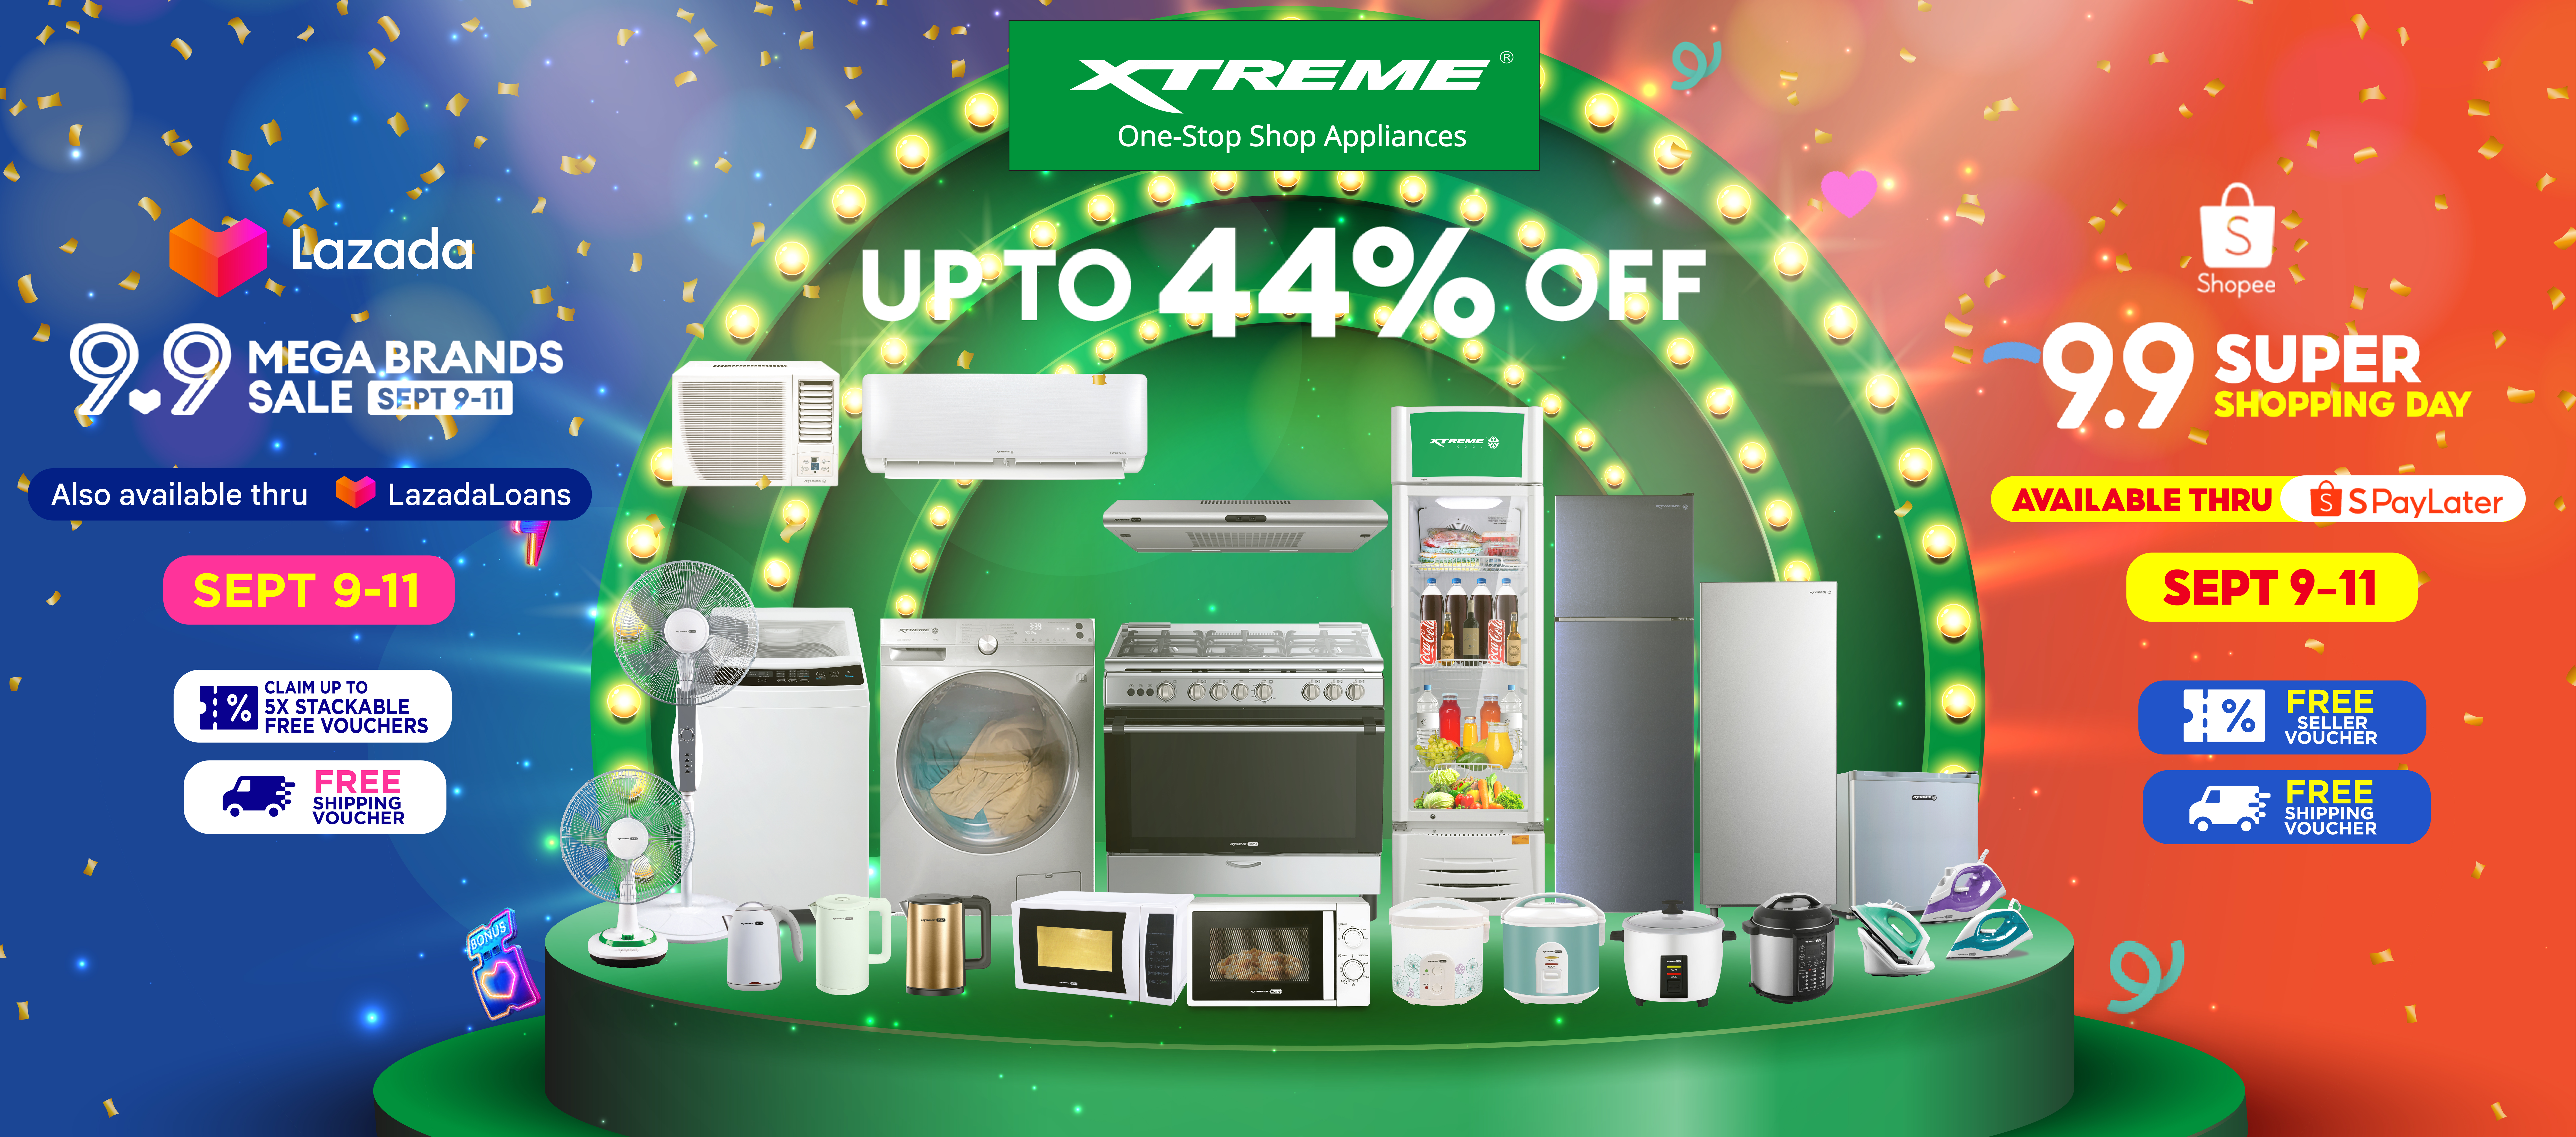 XTREME Appliances Tips on how to score up to 44% on Shopee 9.9 Super Shopping Day and Lazada 9.9 Mega Brands Sale